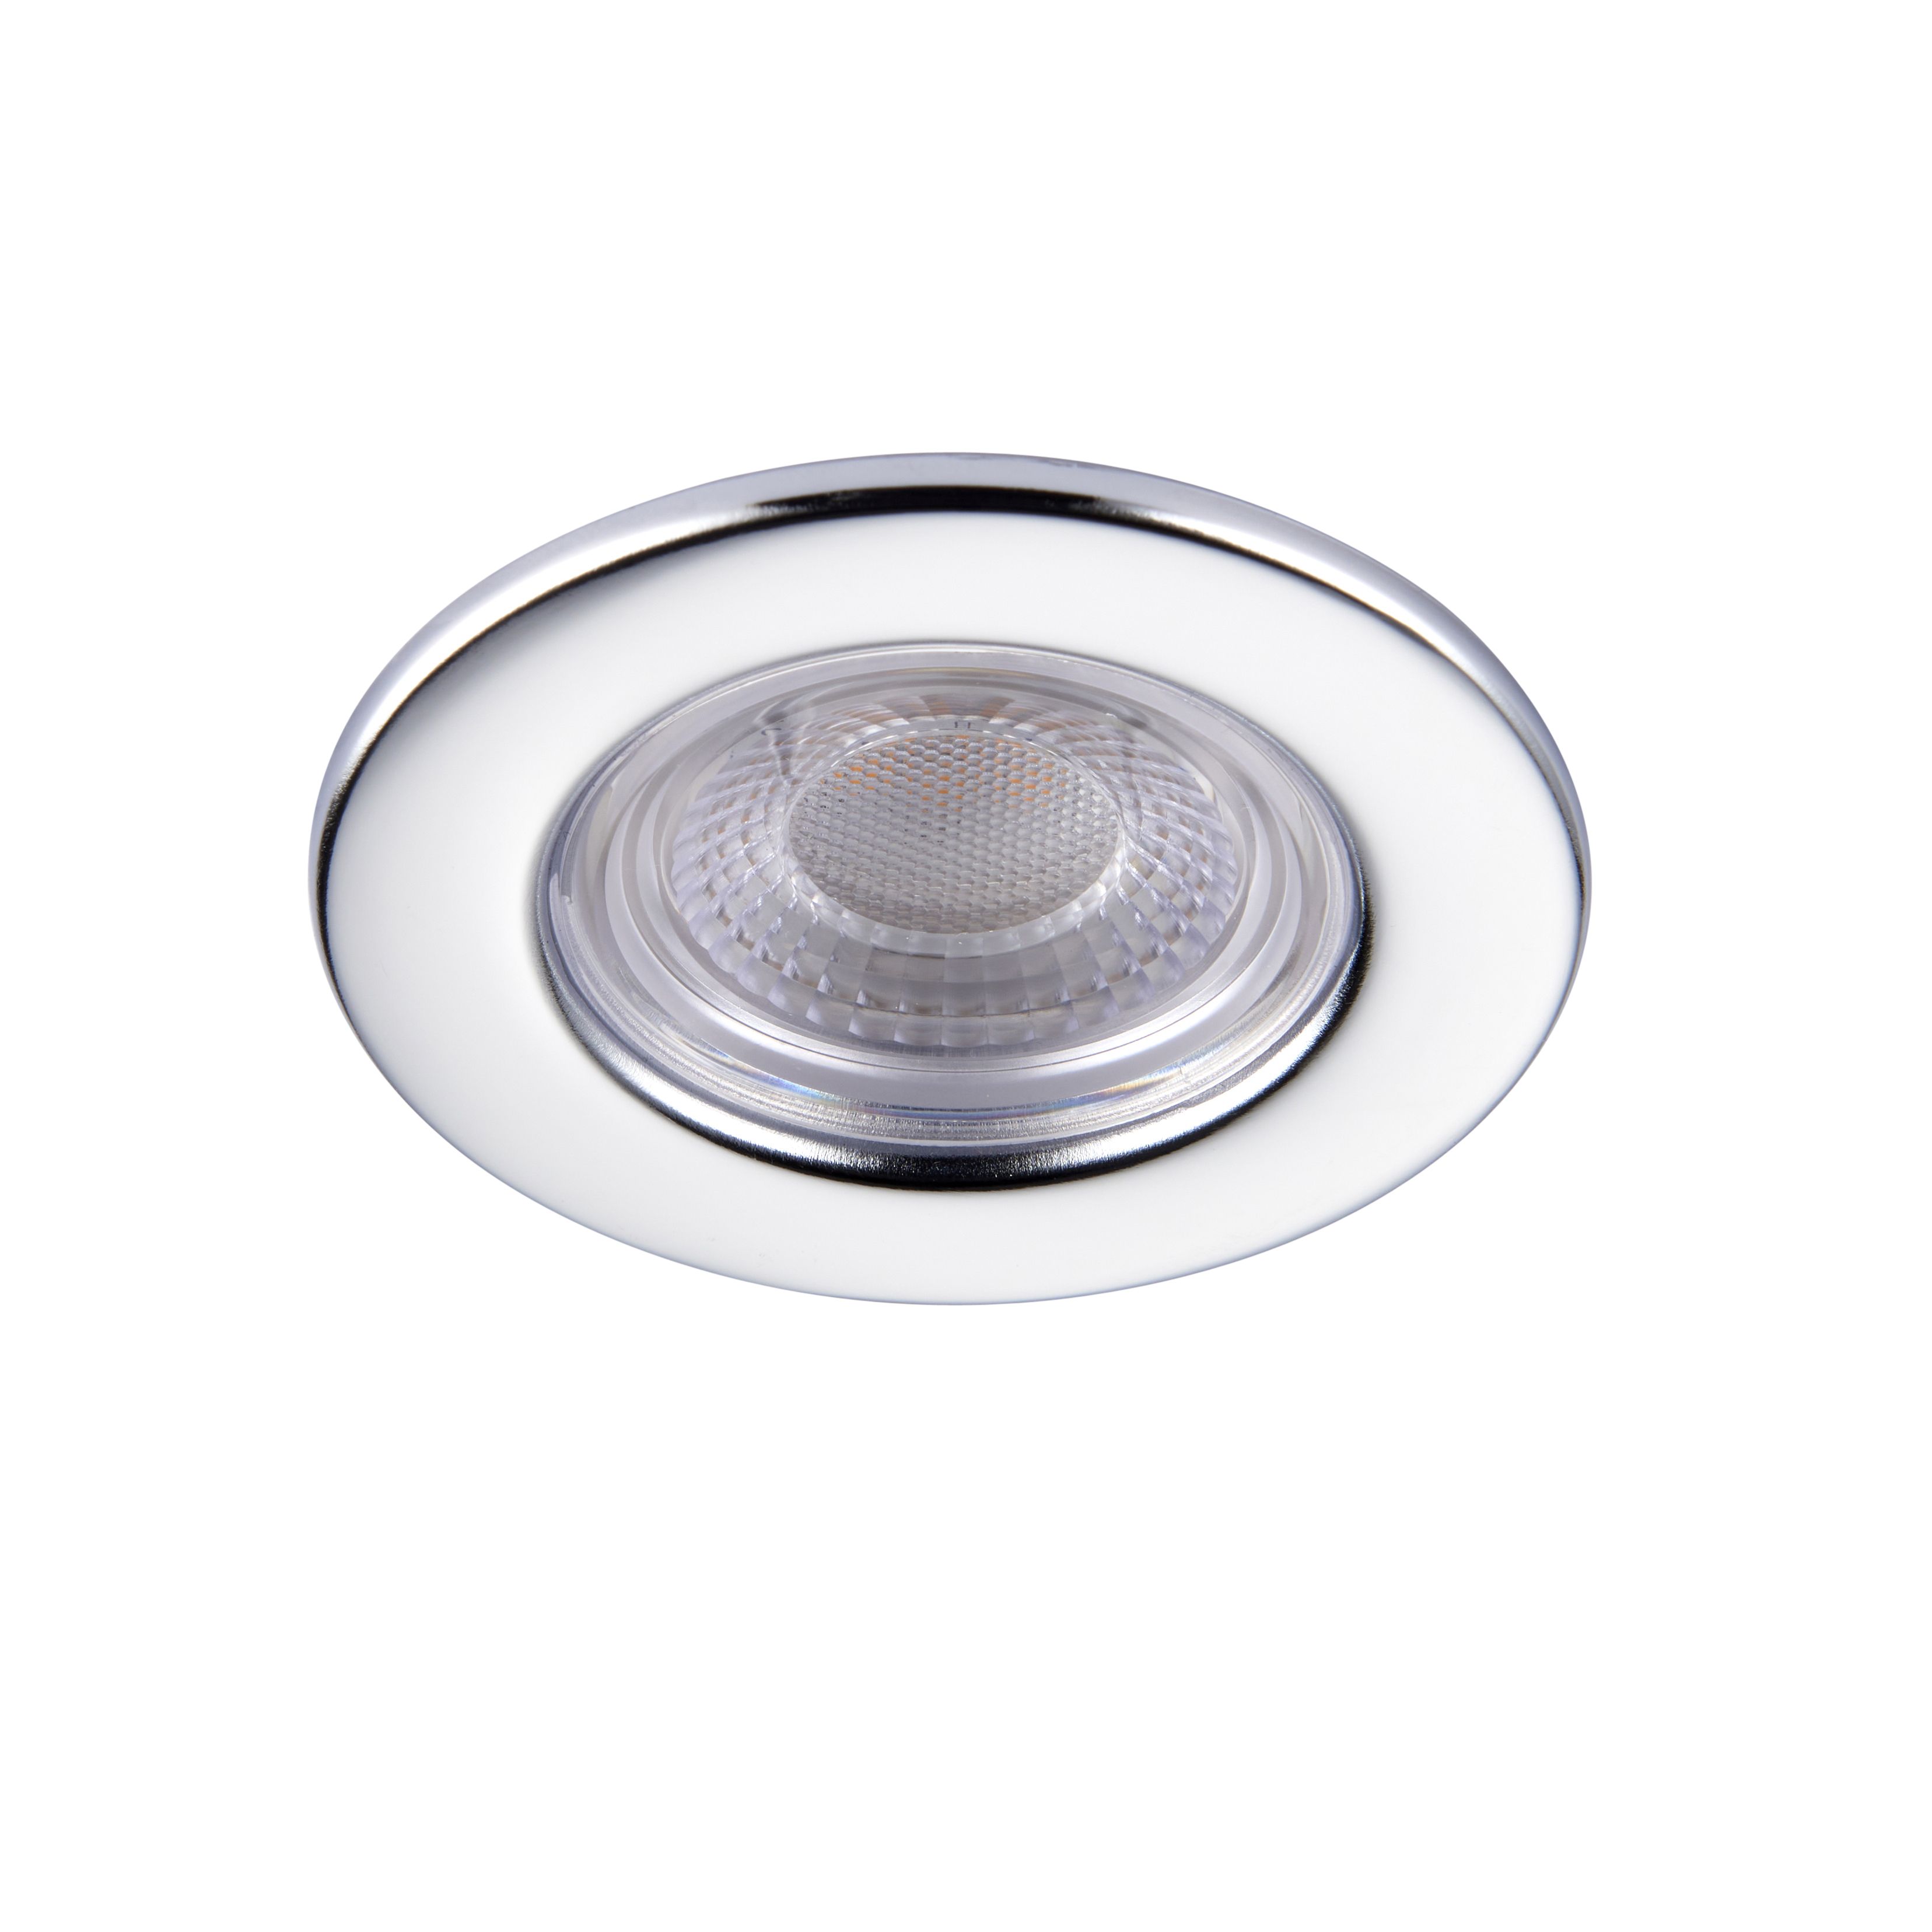 GuardECO Chrome effect Non-adjustable LED Warm white Downlight 6W IP65, Pack of 10